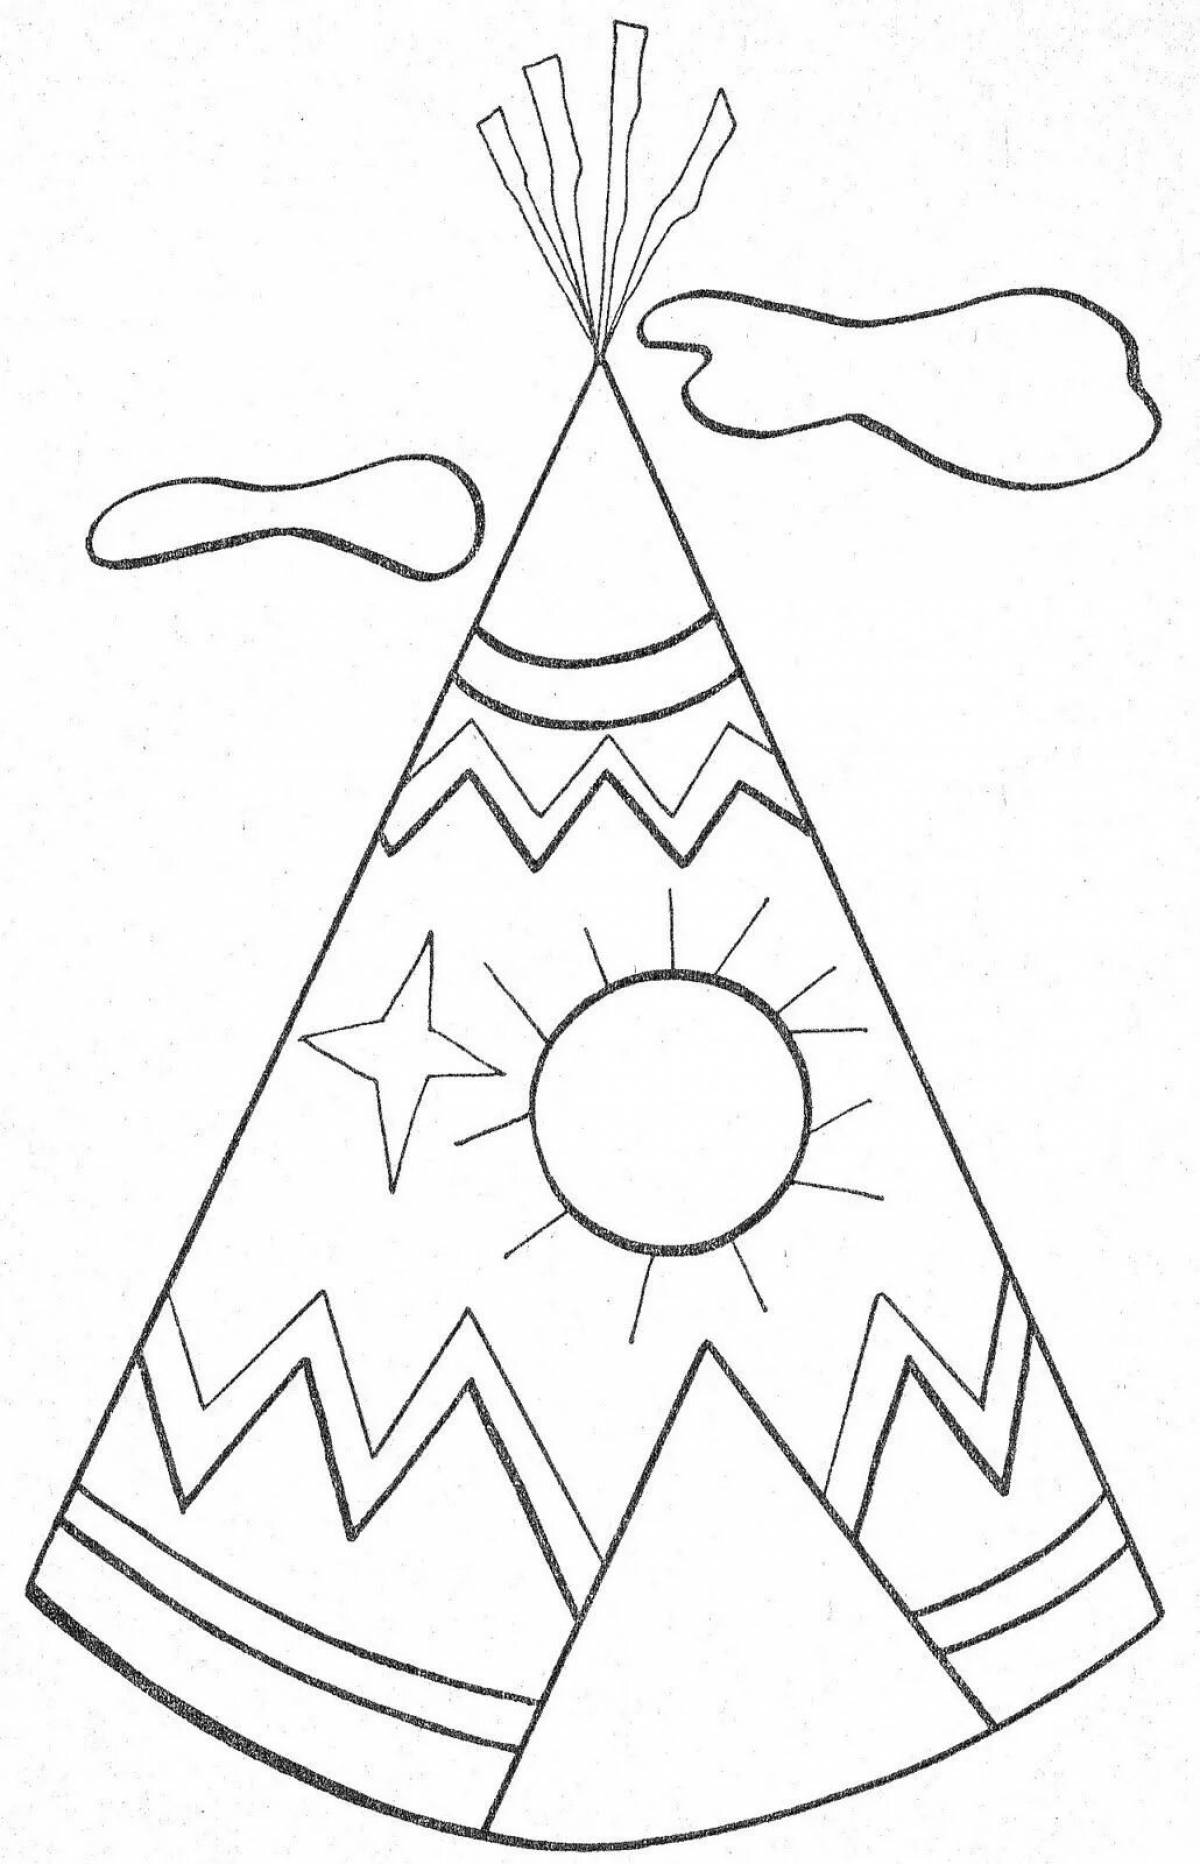 Glitter Sami coloring pages for the little ones